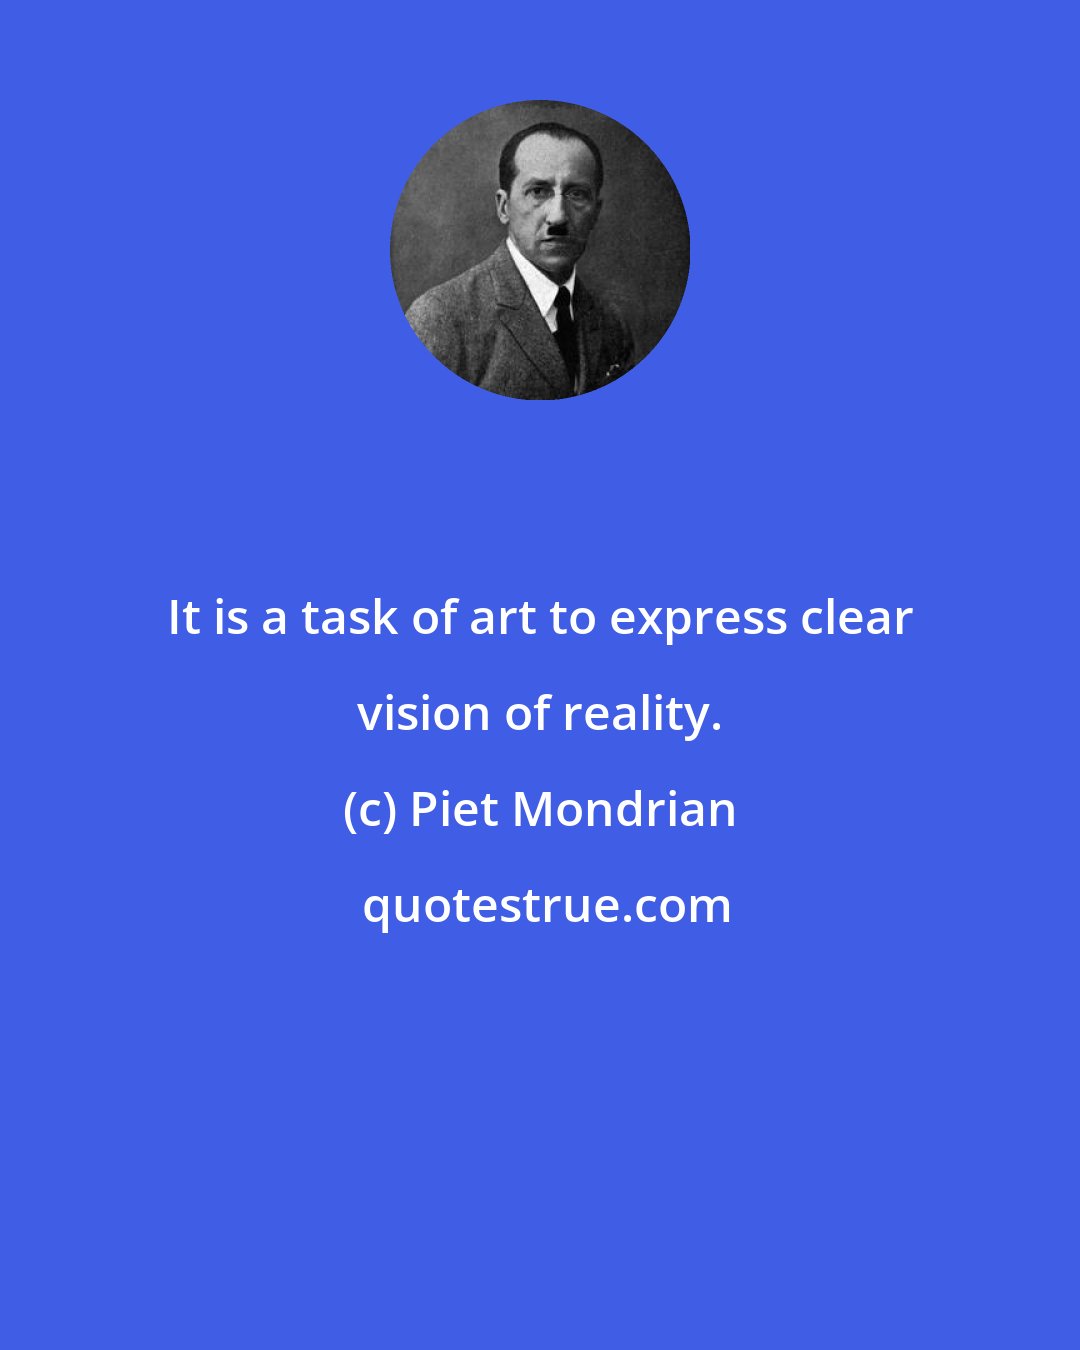 Piet Mondrian: It is a task of art to express clear vision of reality.